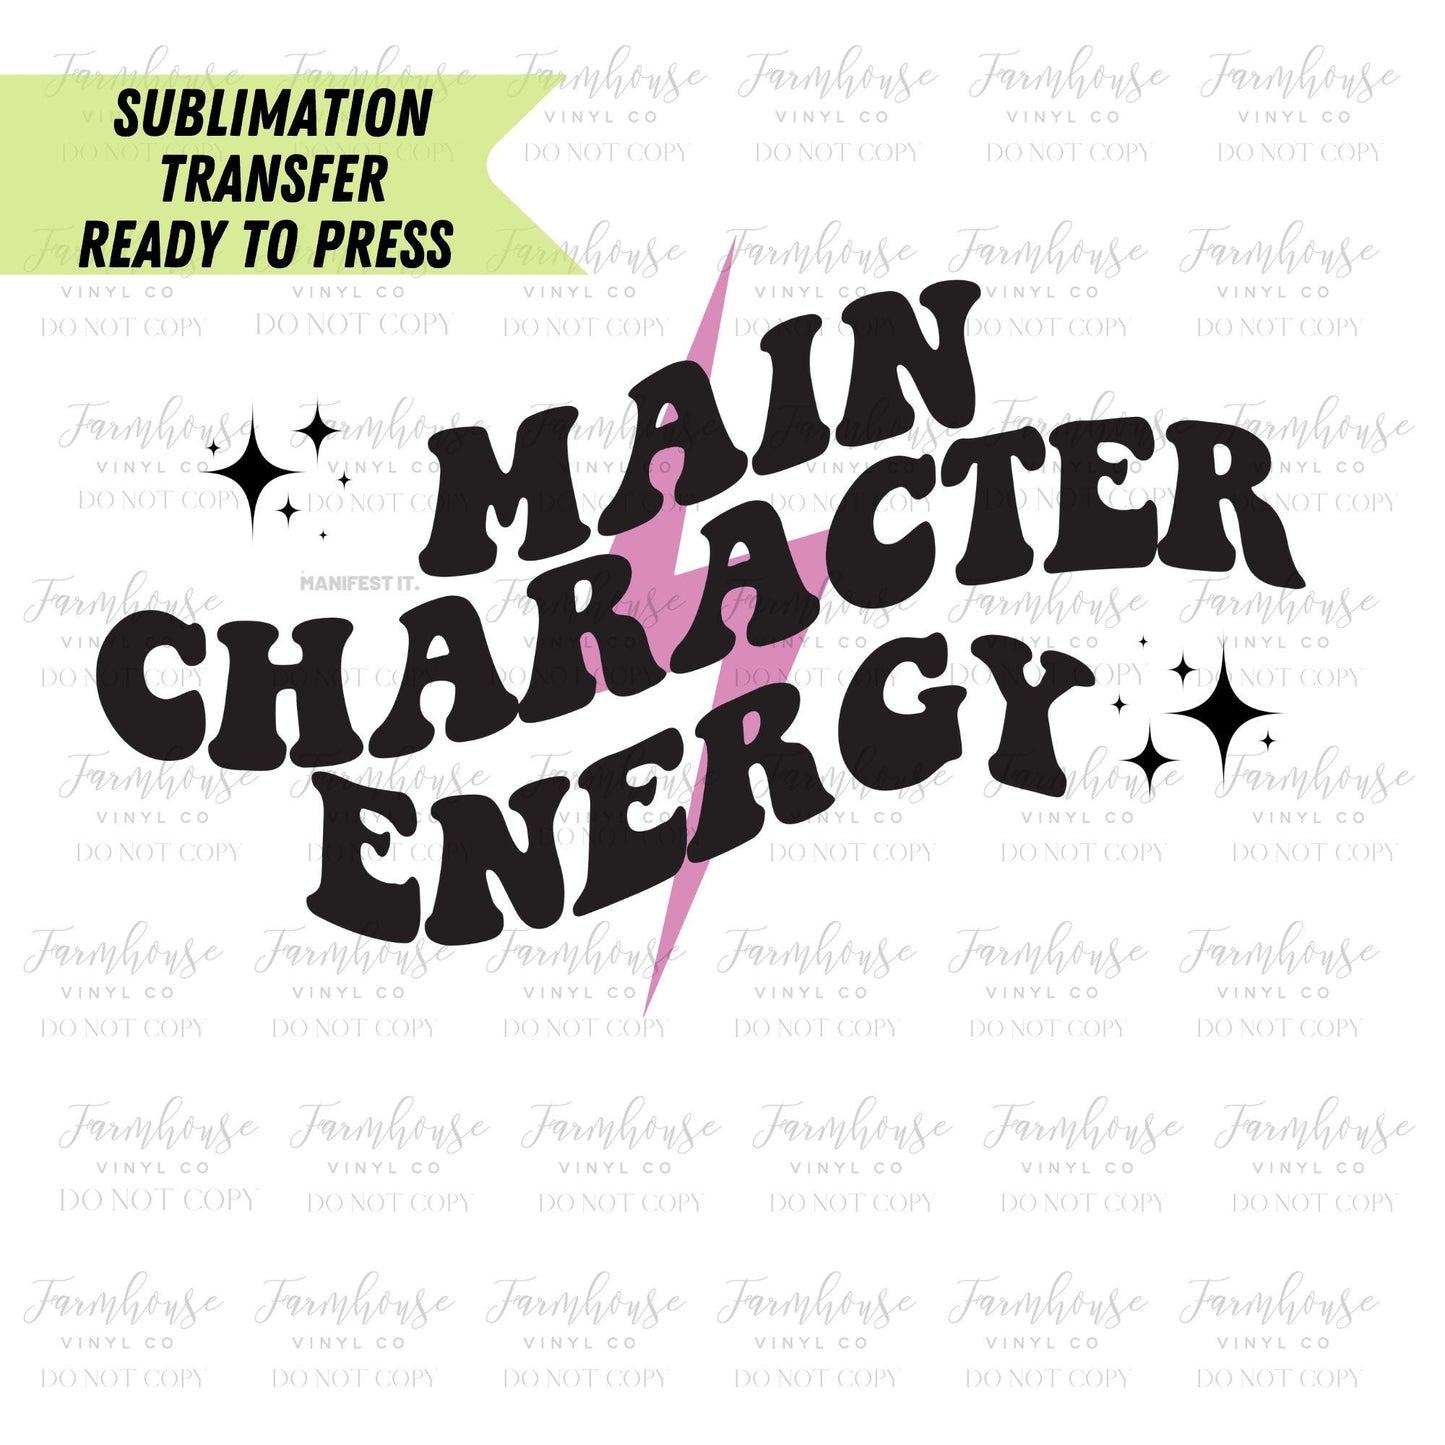 Main Character Energy, Ready to Press Sublimation Transfer, Sublimation Transfers, Heat Transfer, Ready to Press, Retro Design Transfer - Farmhouse Vinyl Co